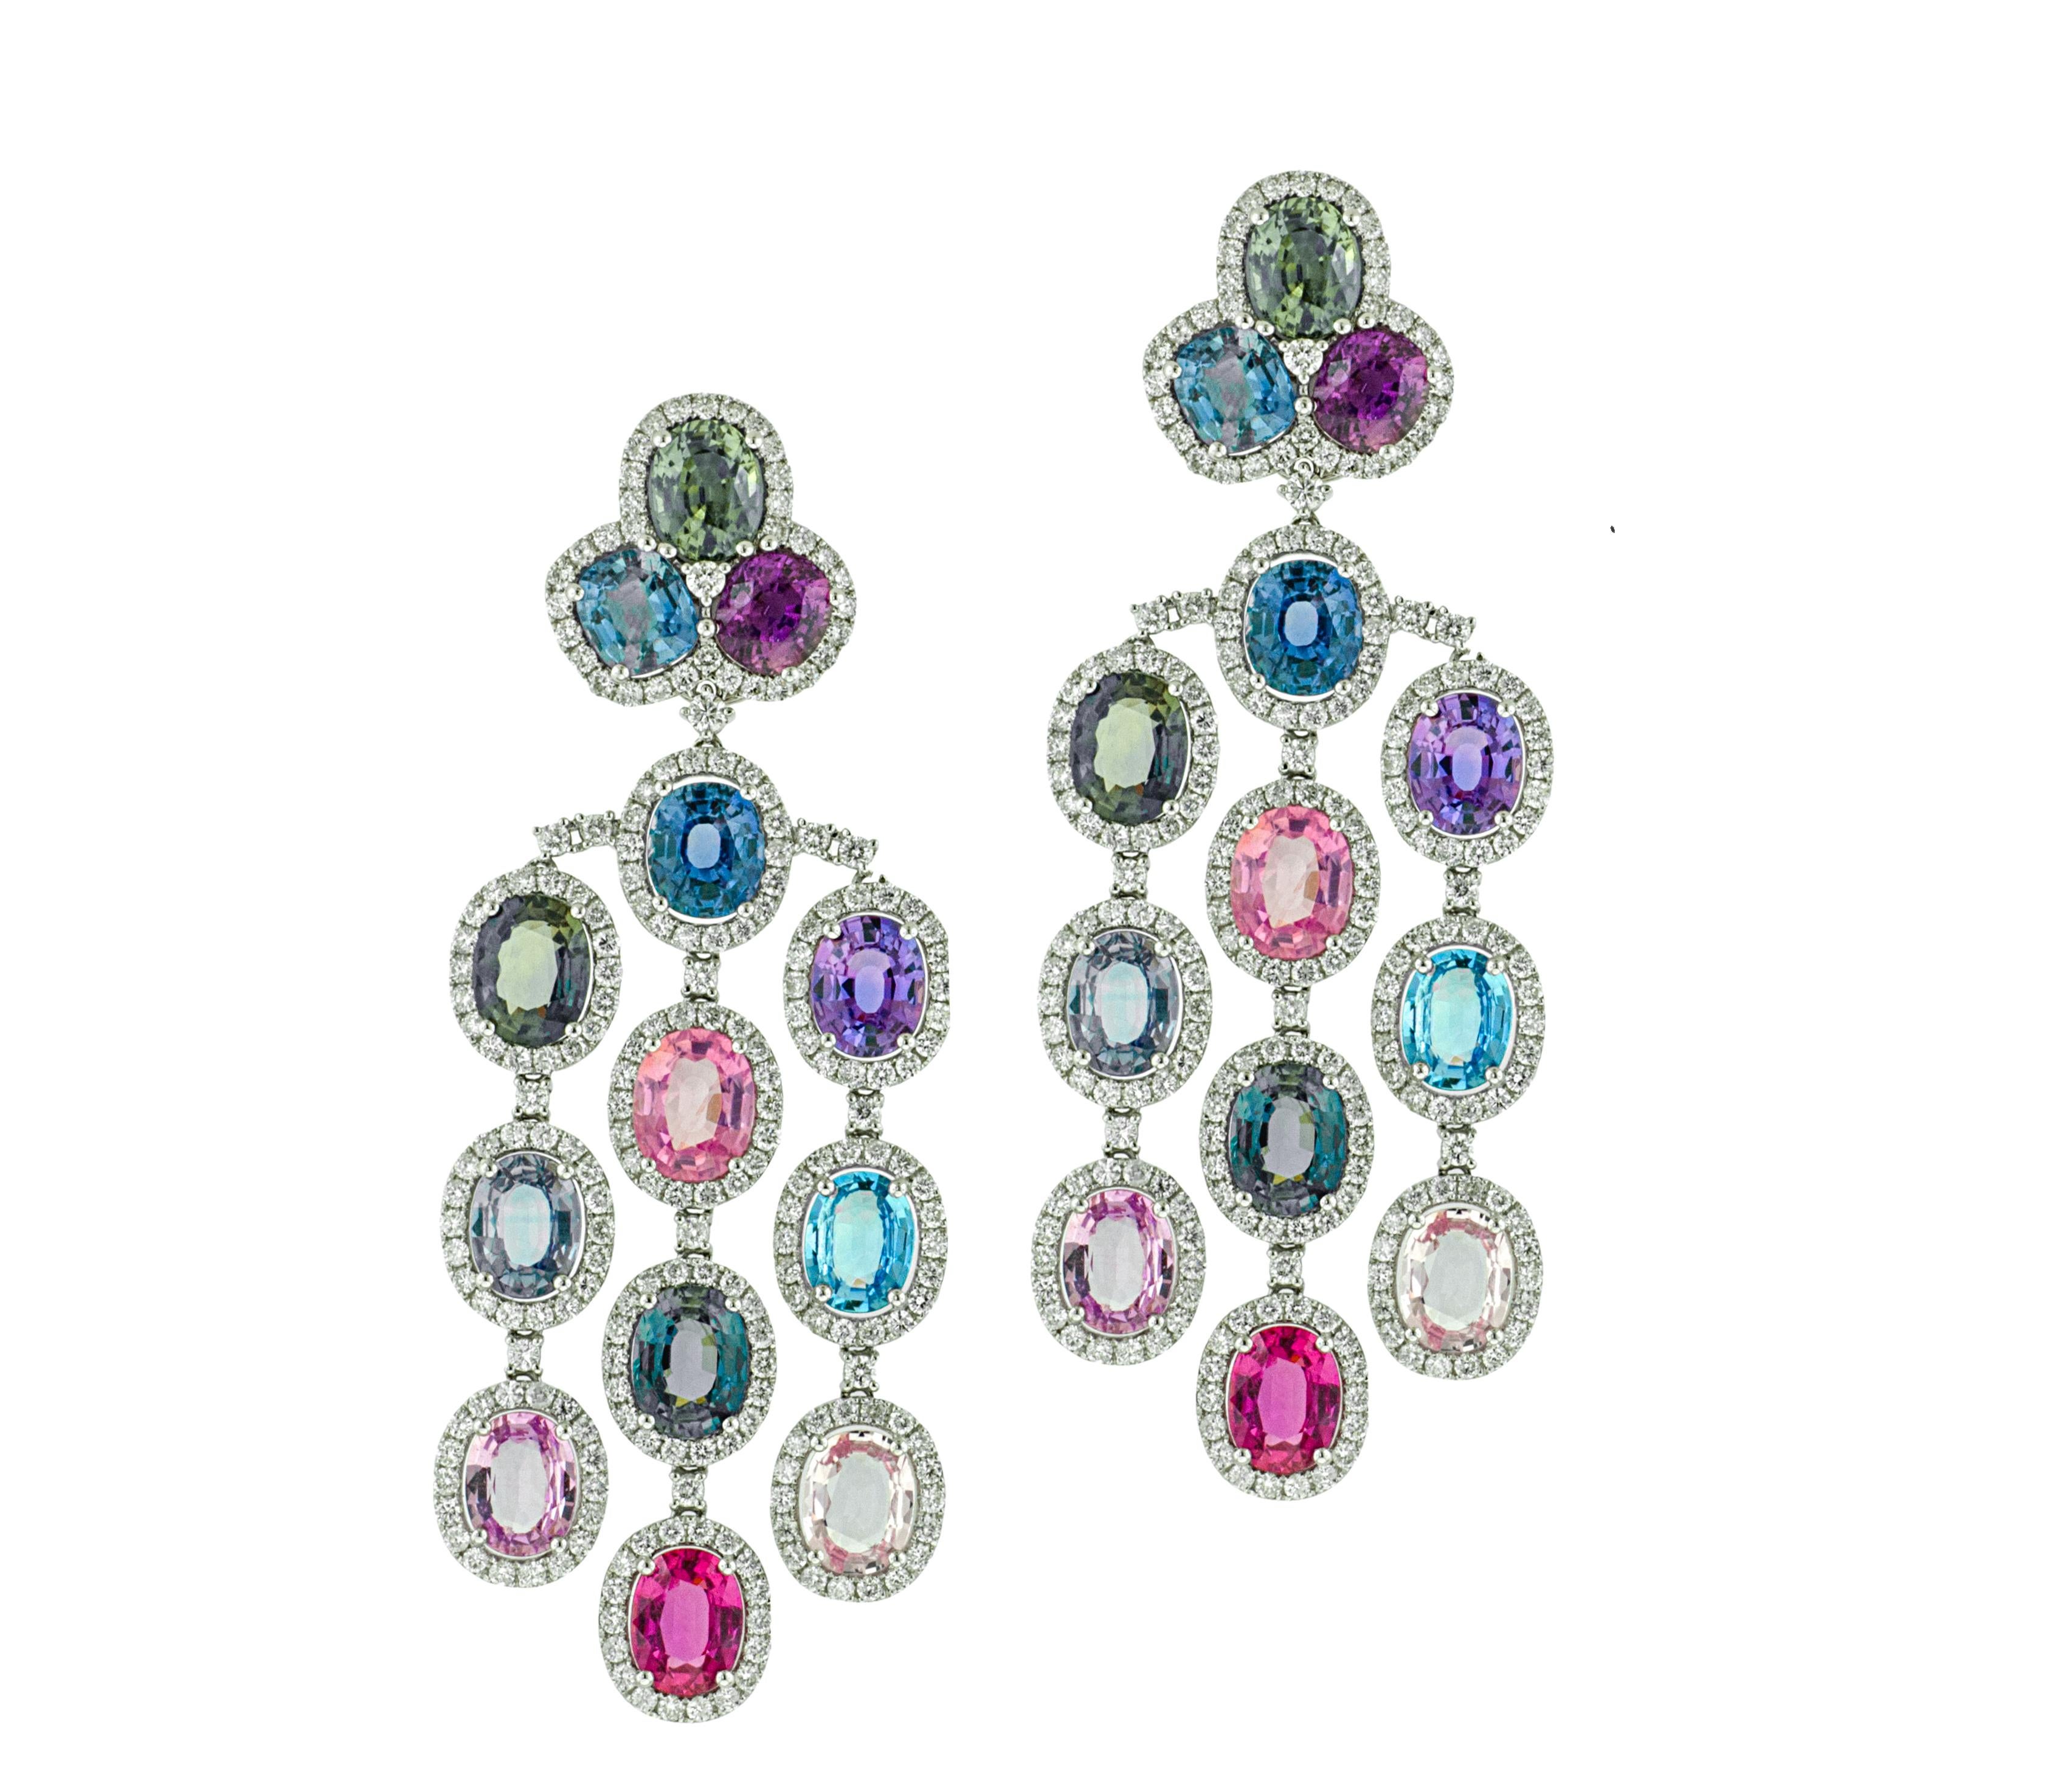 18kt white gold multi color sapphires diamonds chandelier earrings, features 63.20 multi colors sapphires and 9.20ct of round diamonds.
